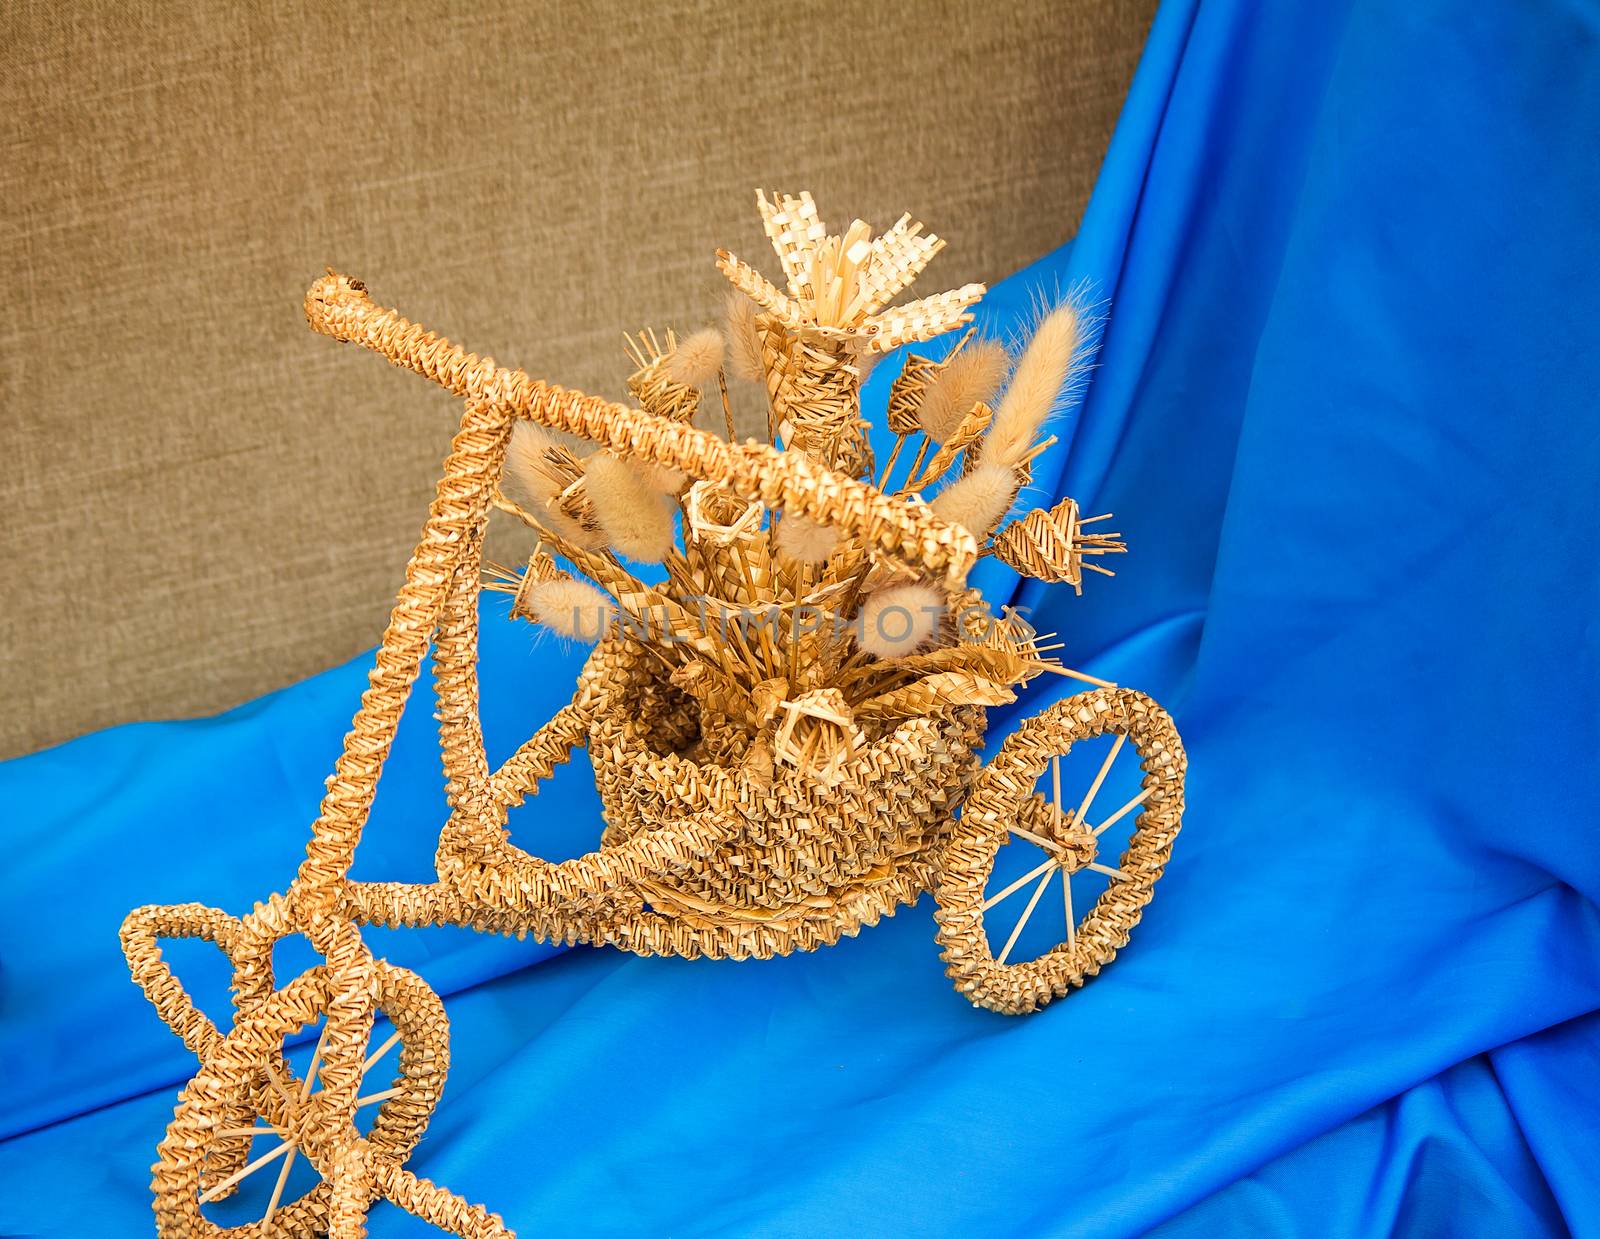 Souvenir product: the children's bicycle with a bouquet of flowers. It is made of wattled straw. It is presented against blue silk.